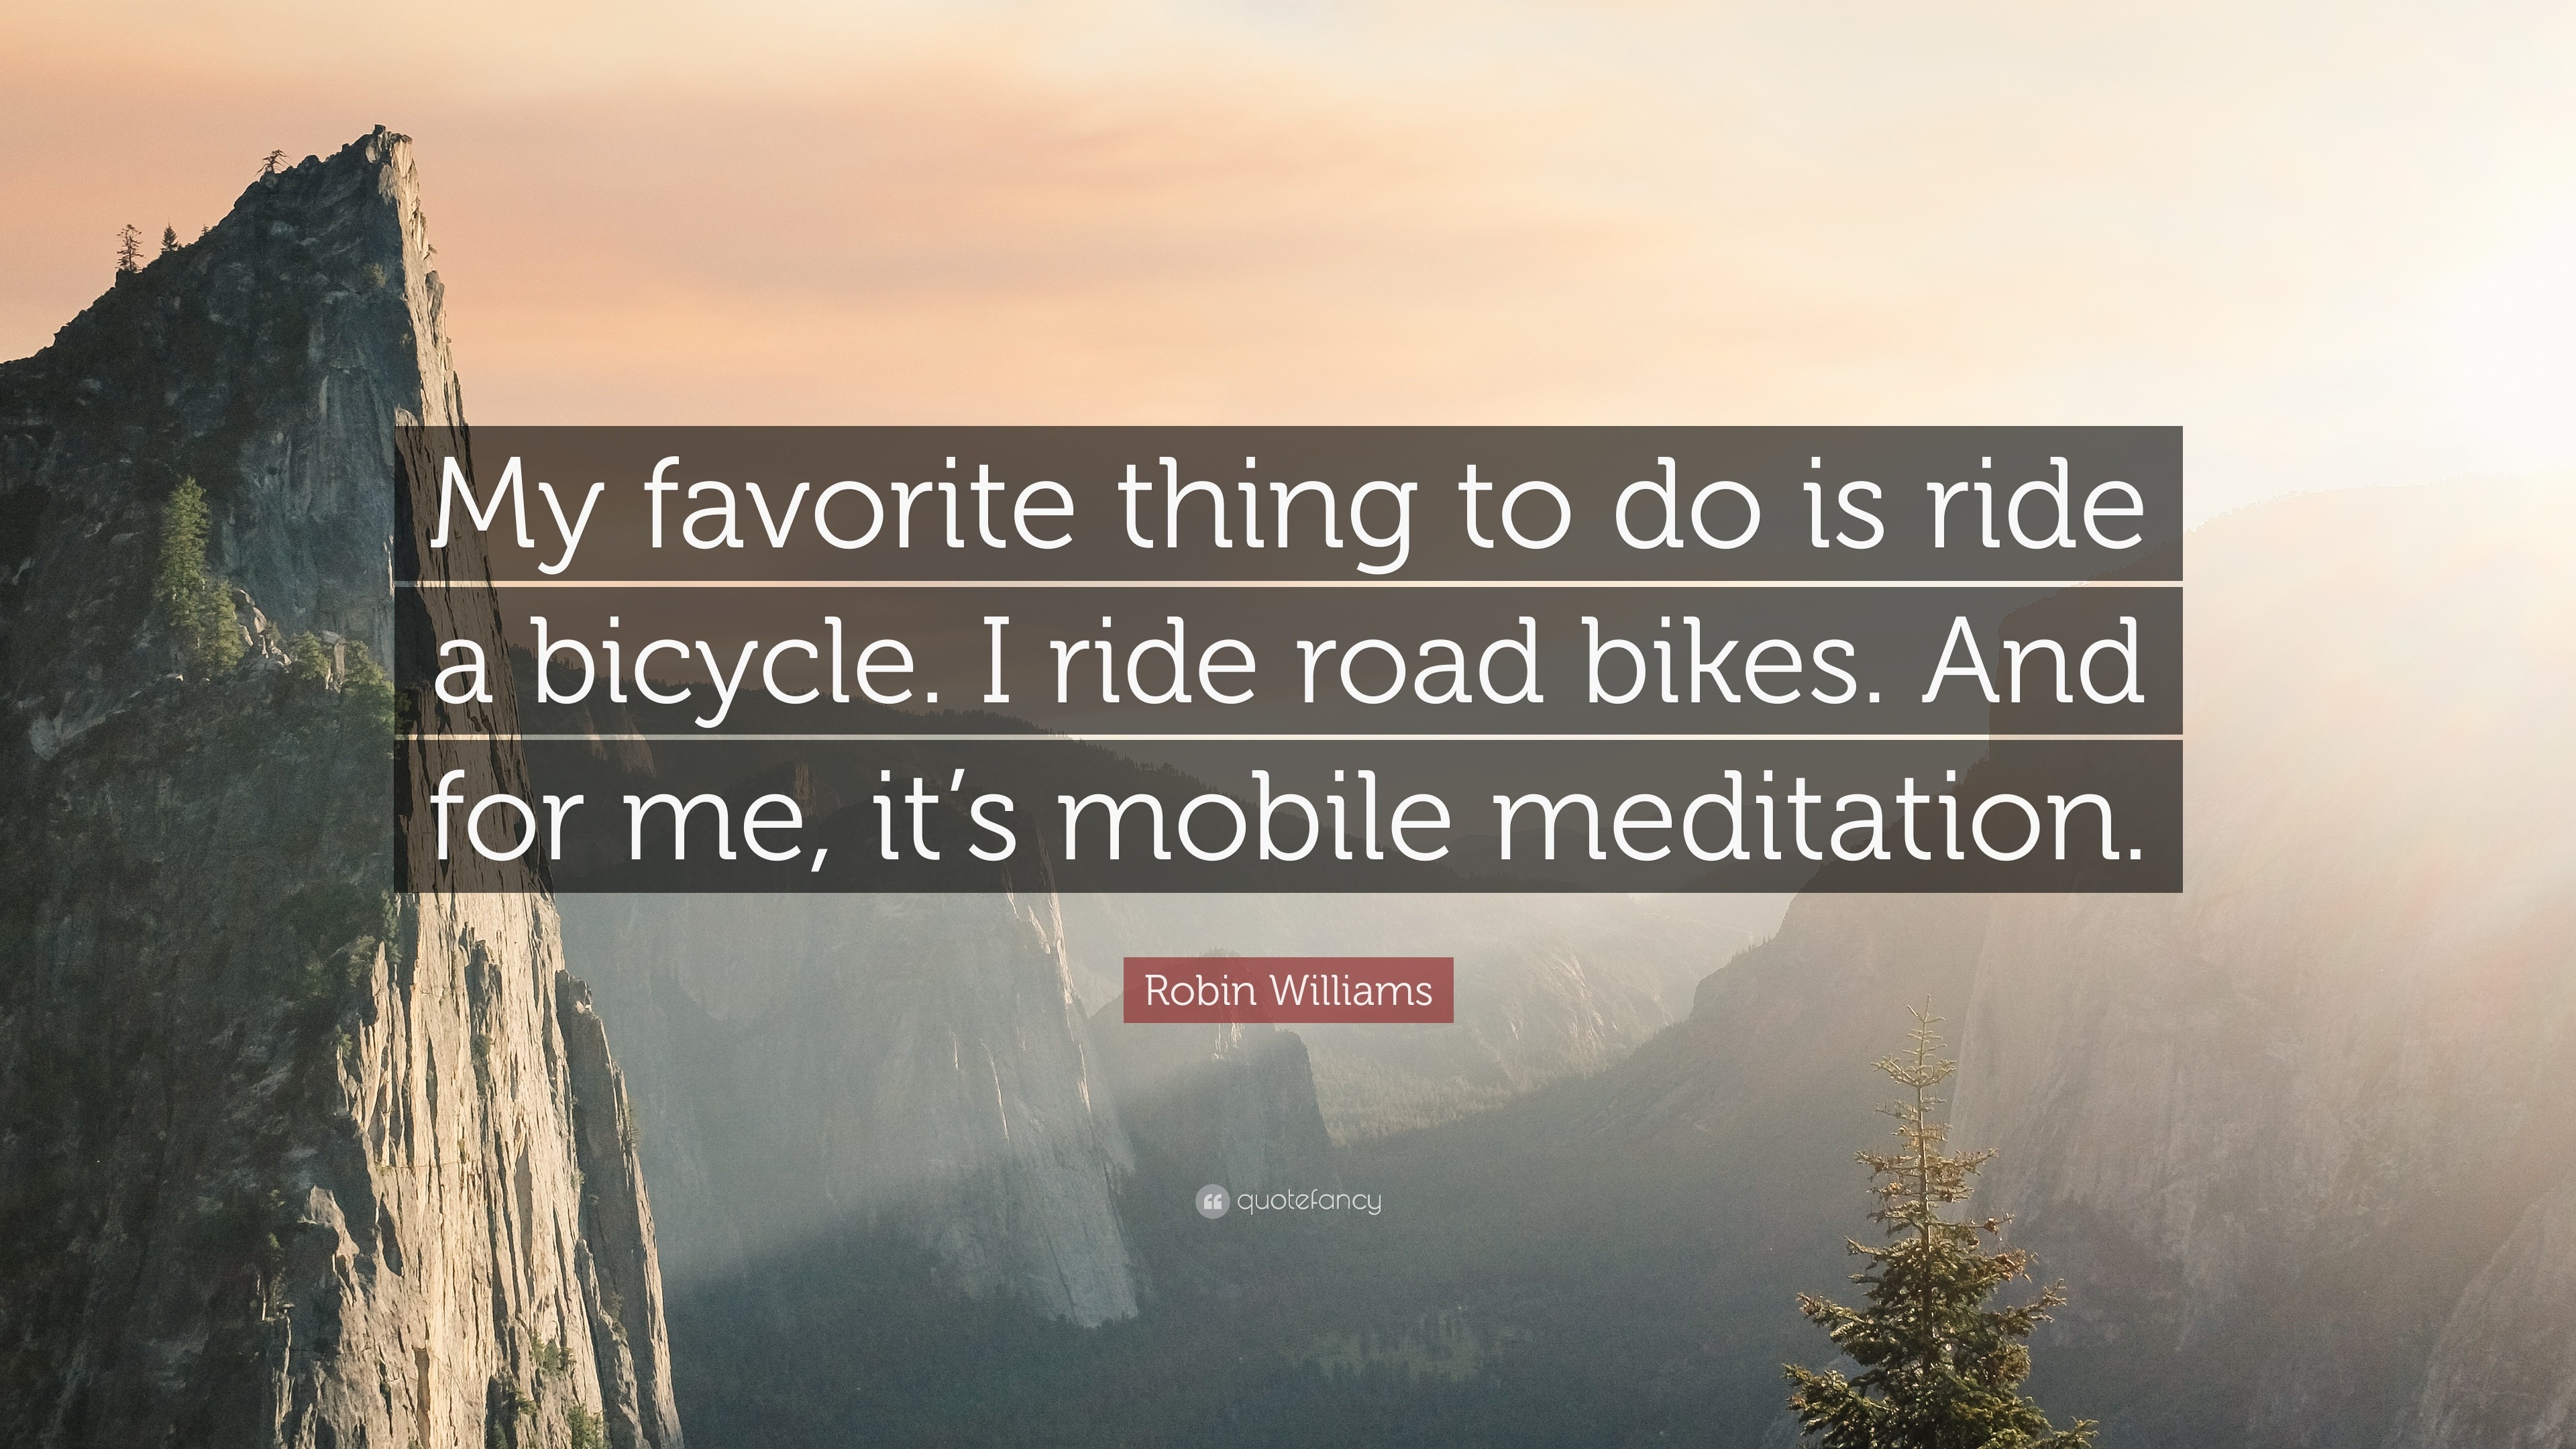 3840x2160 Robin Williams Quote: “My favorite thing to do is ride a bicycle. I